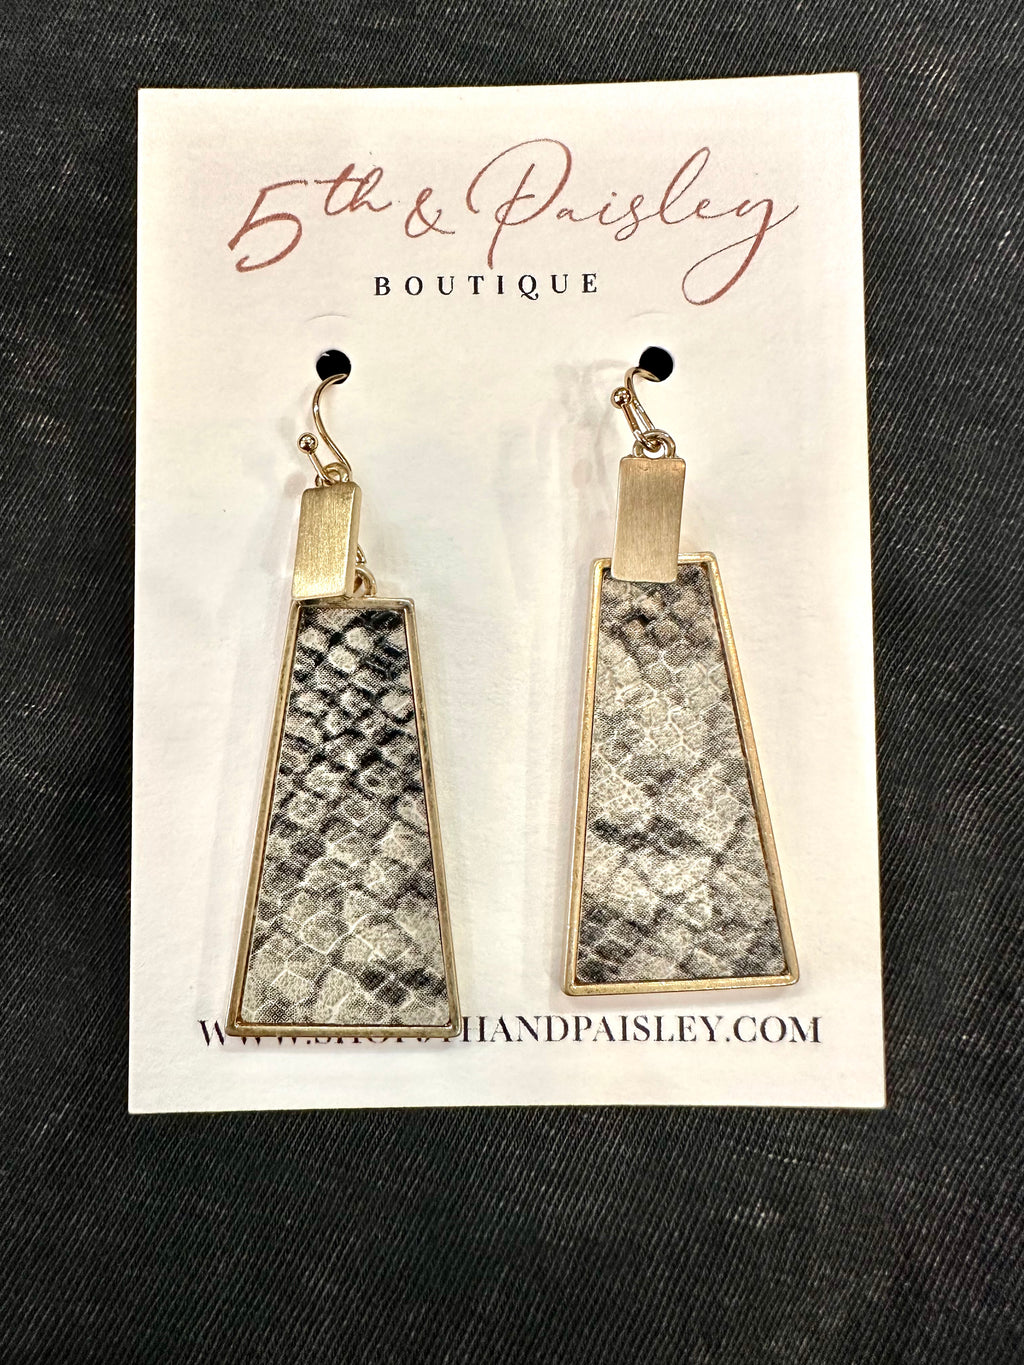 Wild About You Earrings